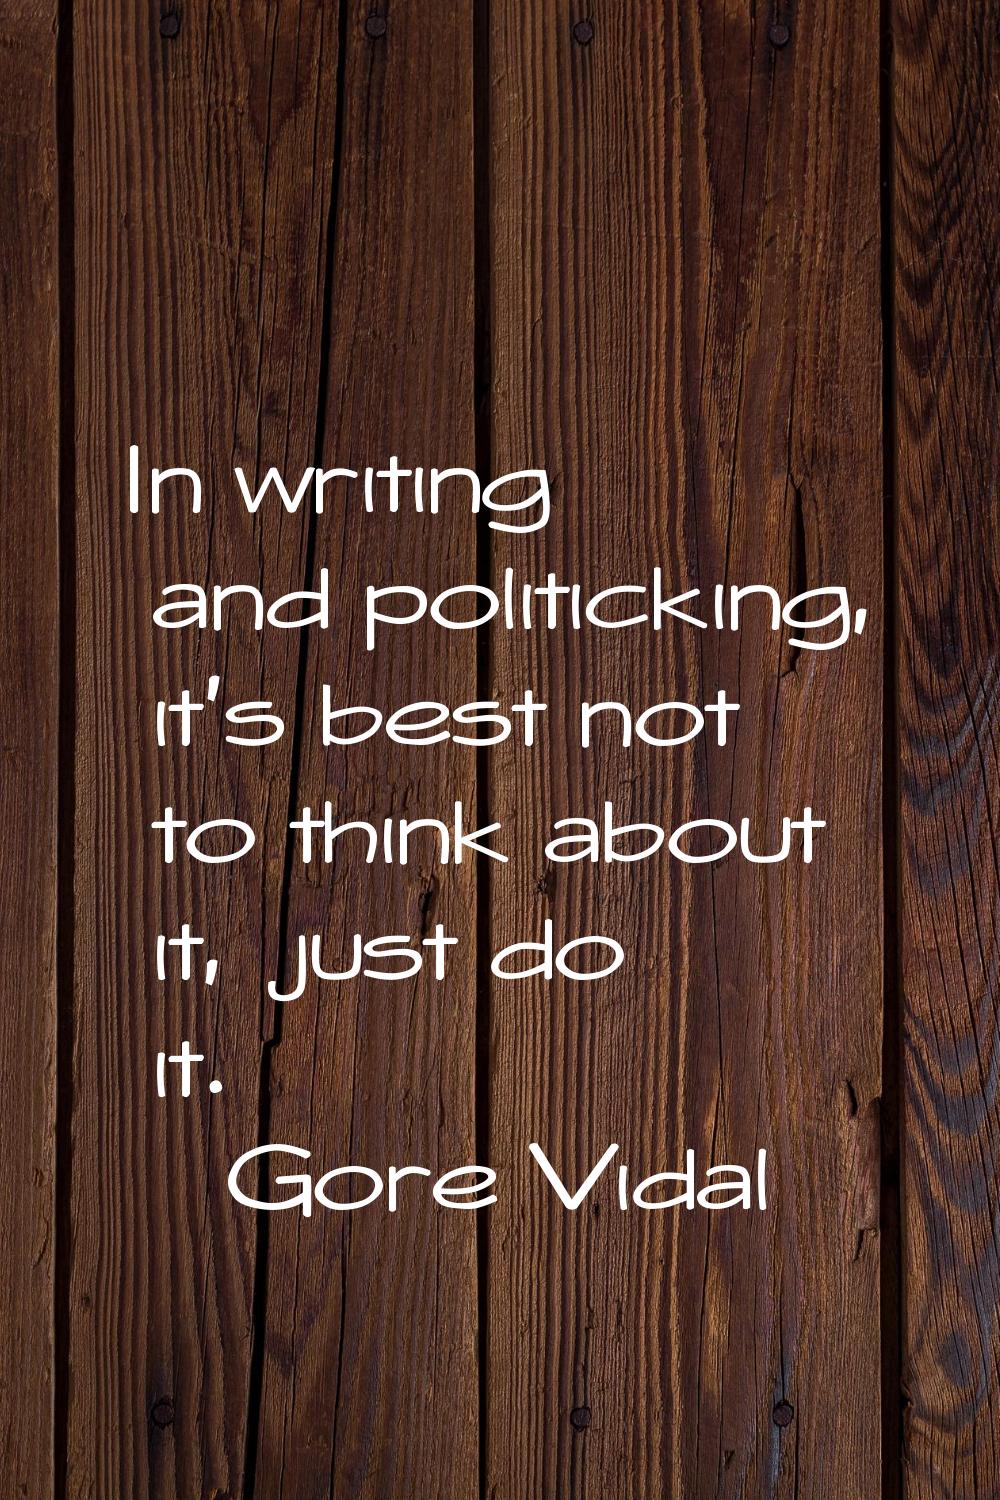 In writing and politicking, it's best not to think about it, just do it.